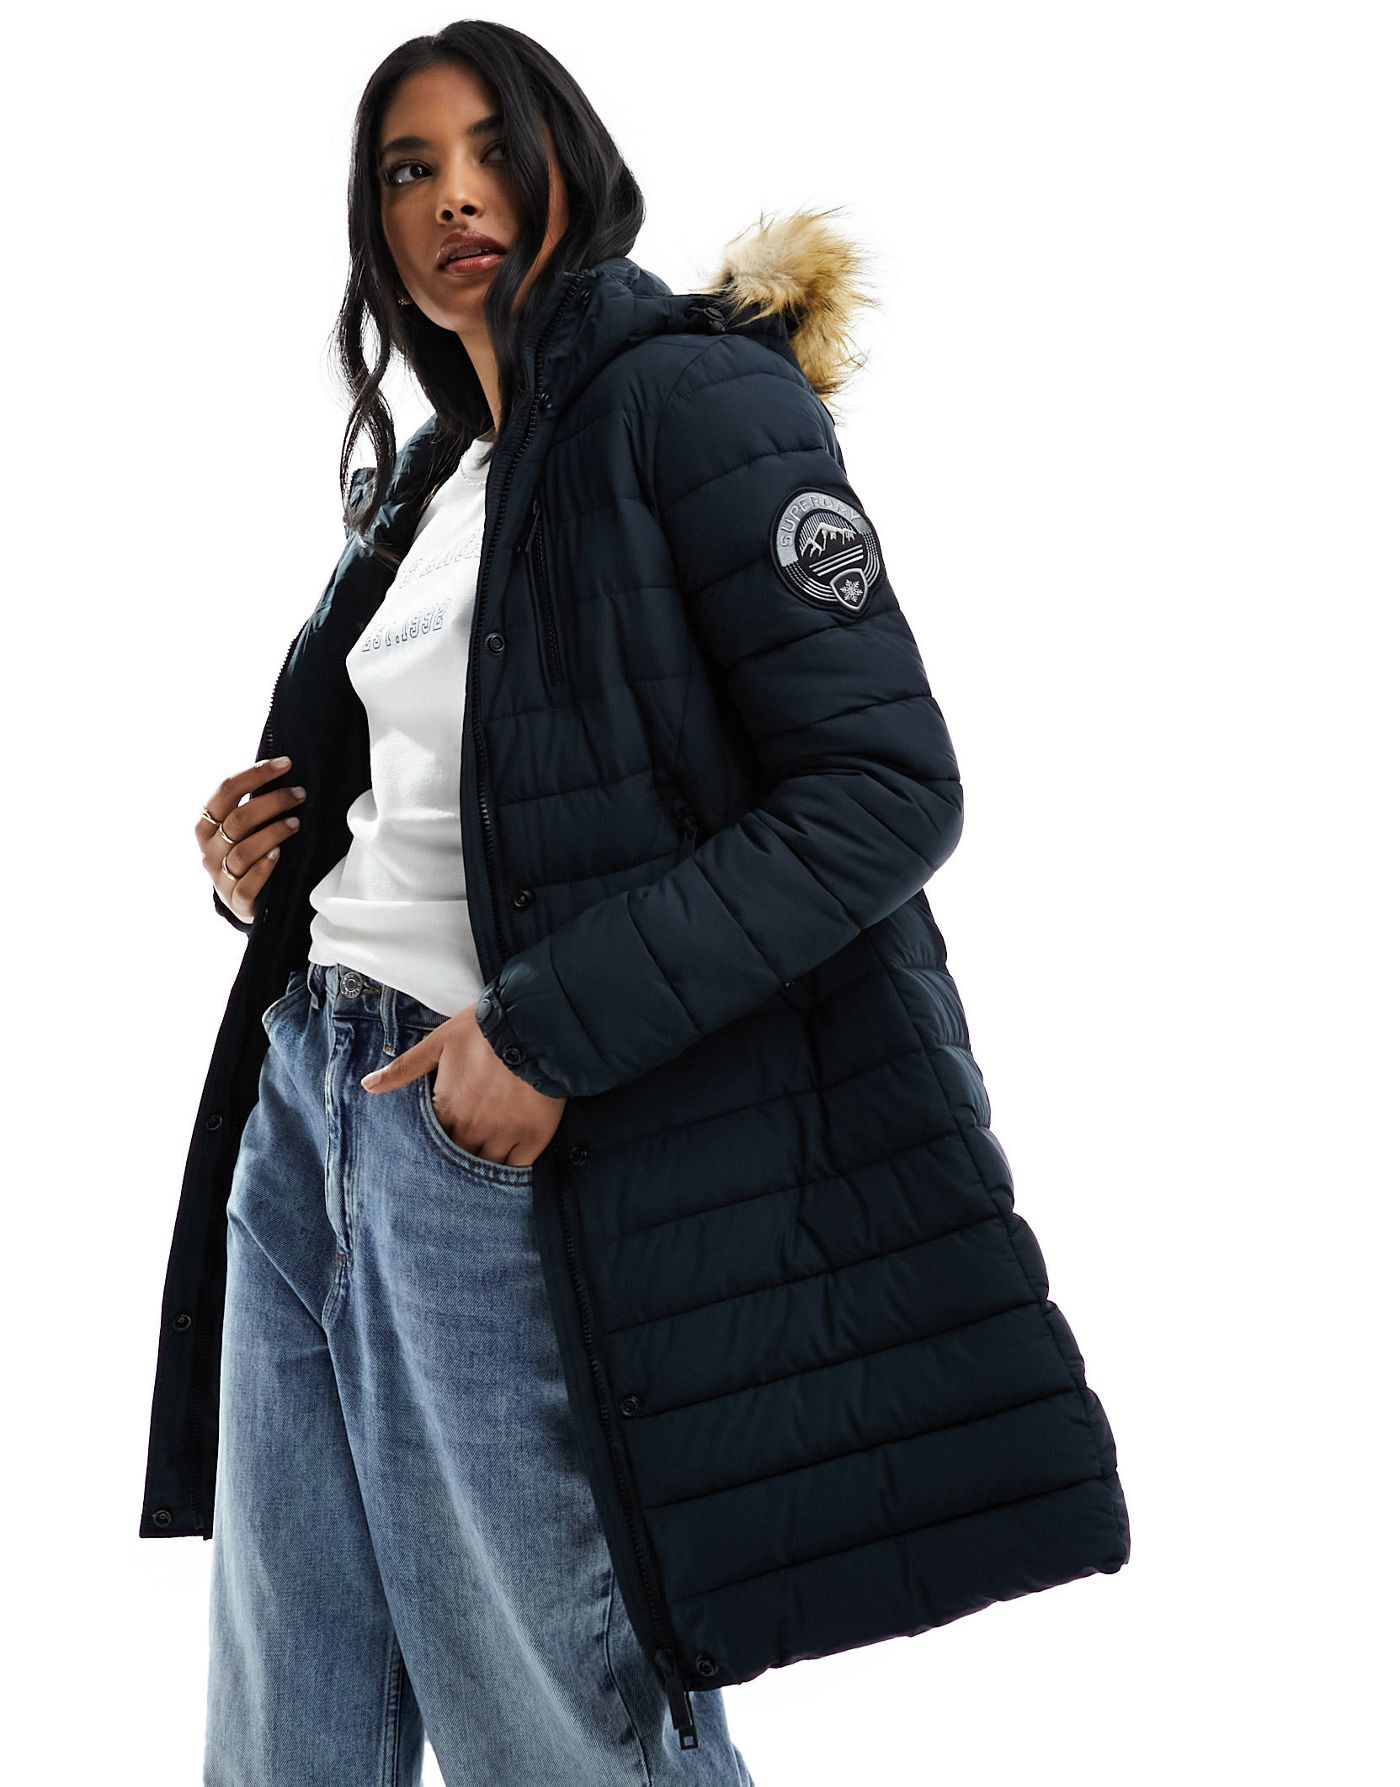 Superdry Fuji hooded mid length puffer coat in nordic chrome navy